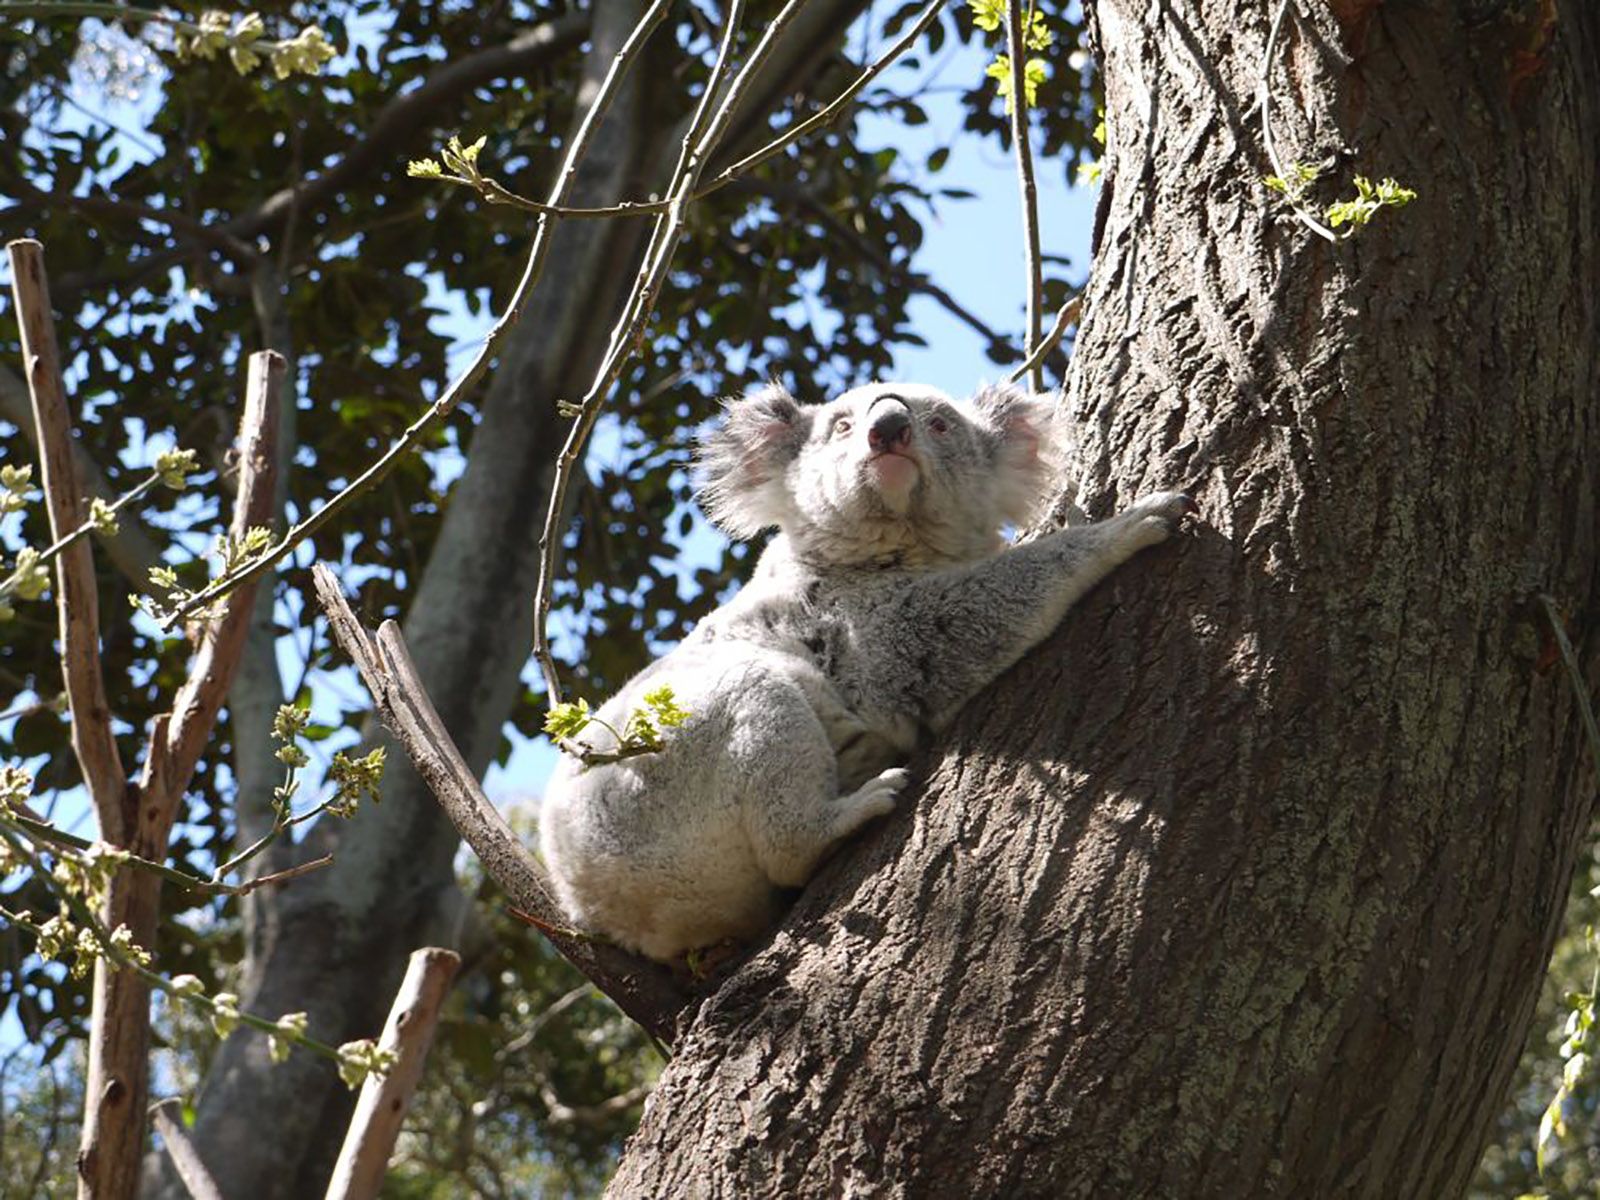 Koala populations in decline due to increased human impacts on nature | CNN